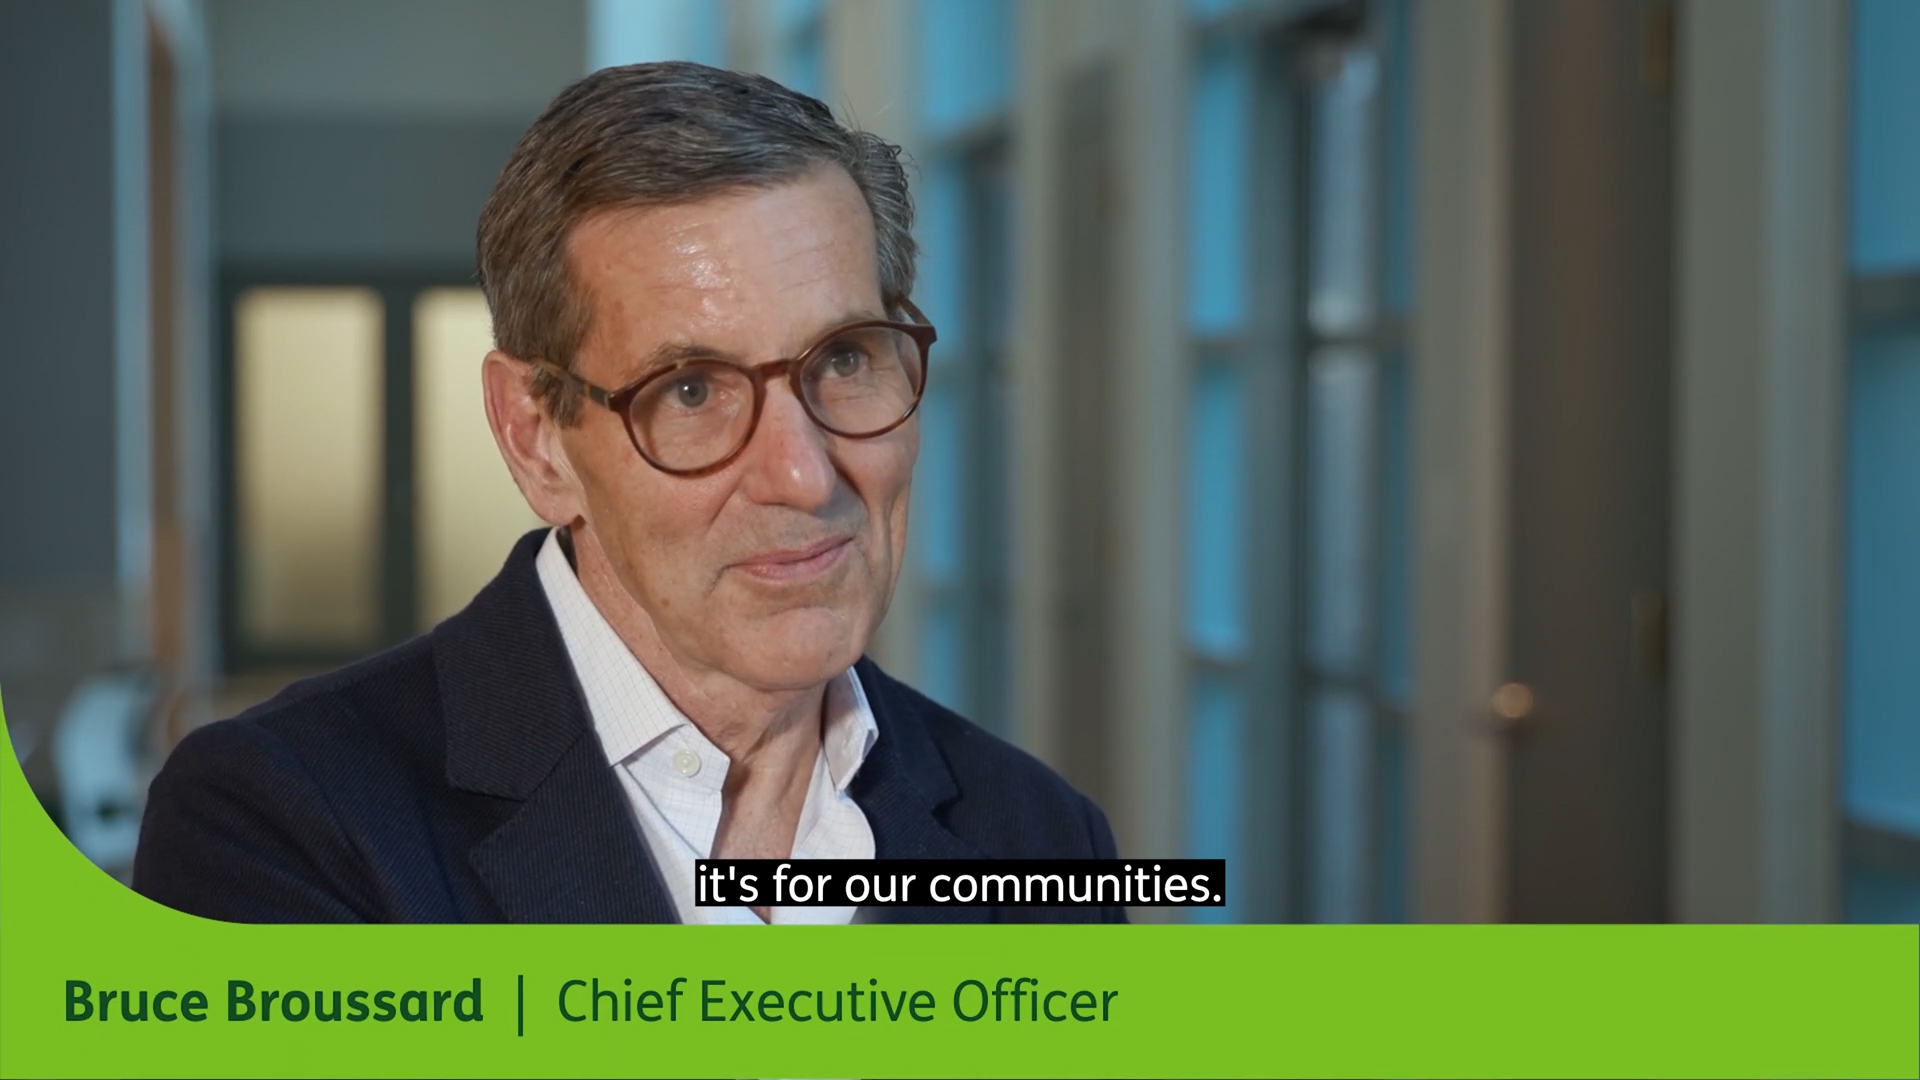 Humana is putting health first for its customers, employees and the communities it serves.